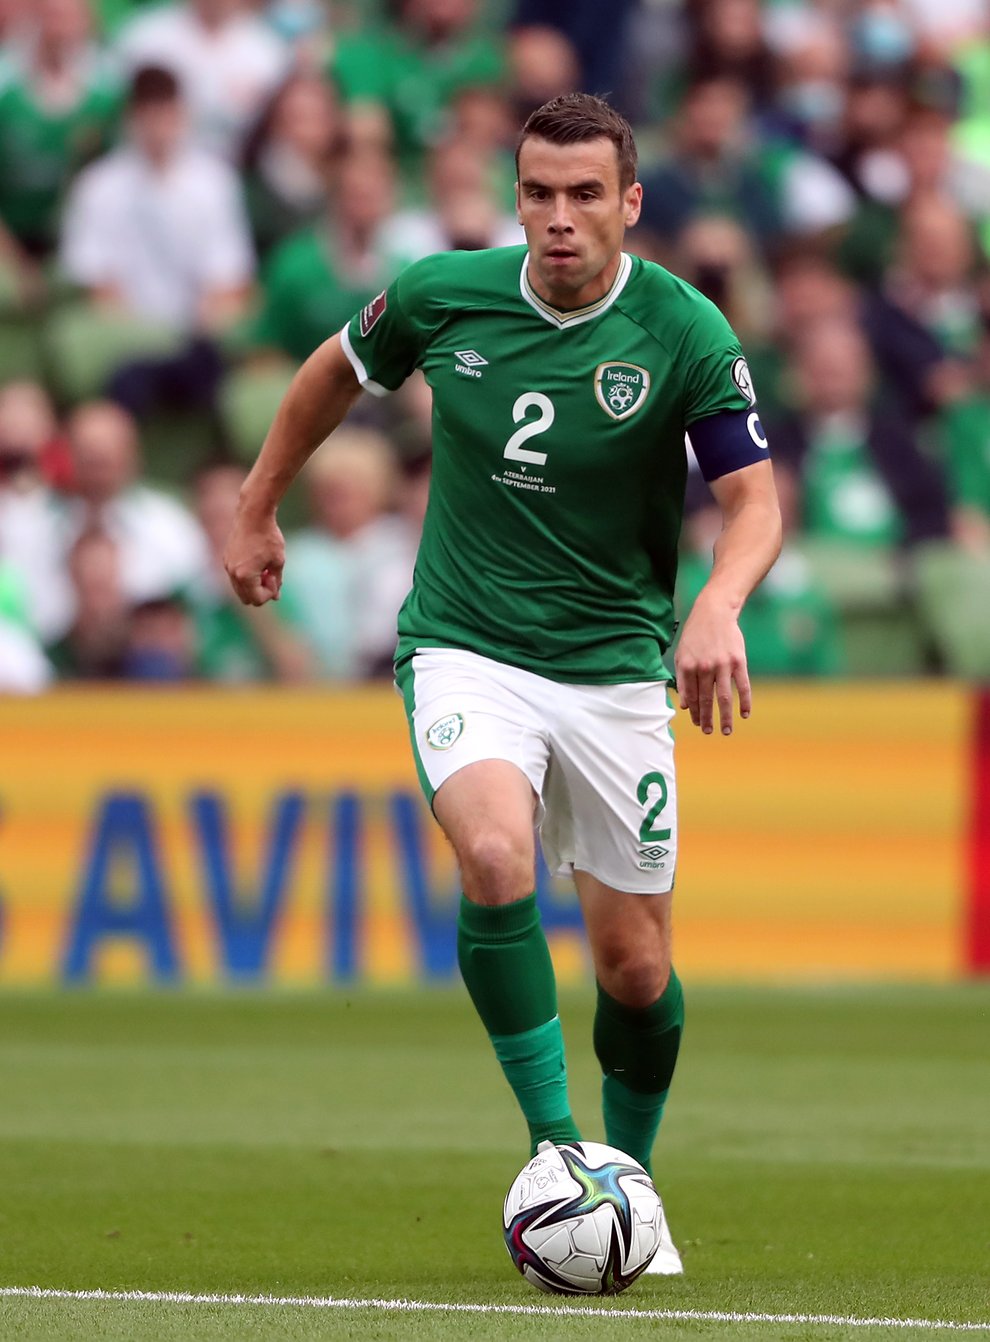 Republic of Ireland skipper Seamus Coleman returns to the squad after injury for the World Cup qualifiers against Portugal and Luxembourg (Niall Carson/PA)